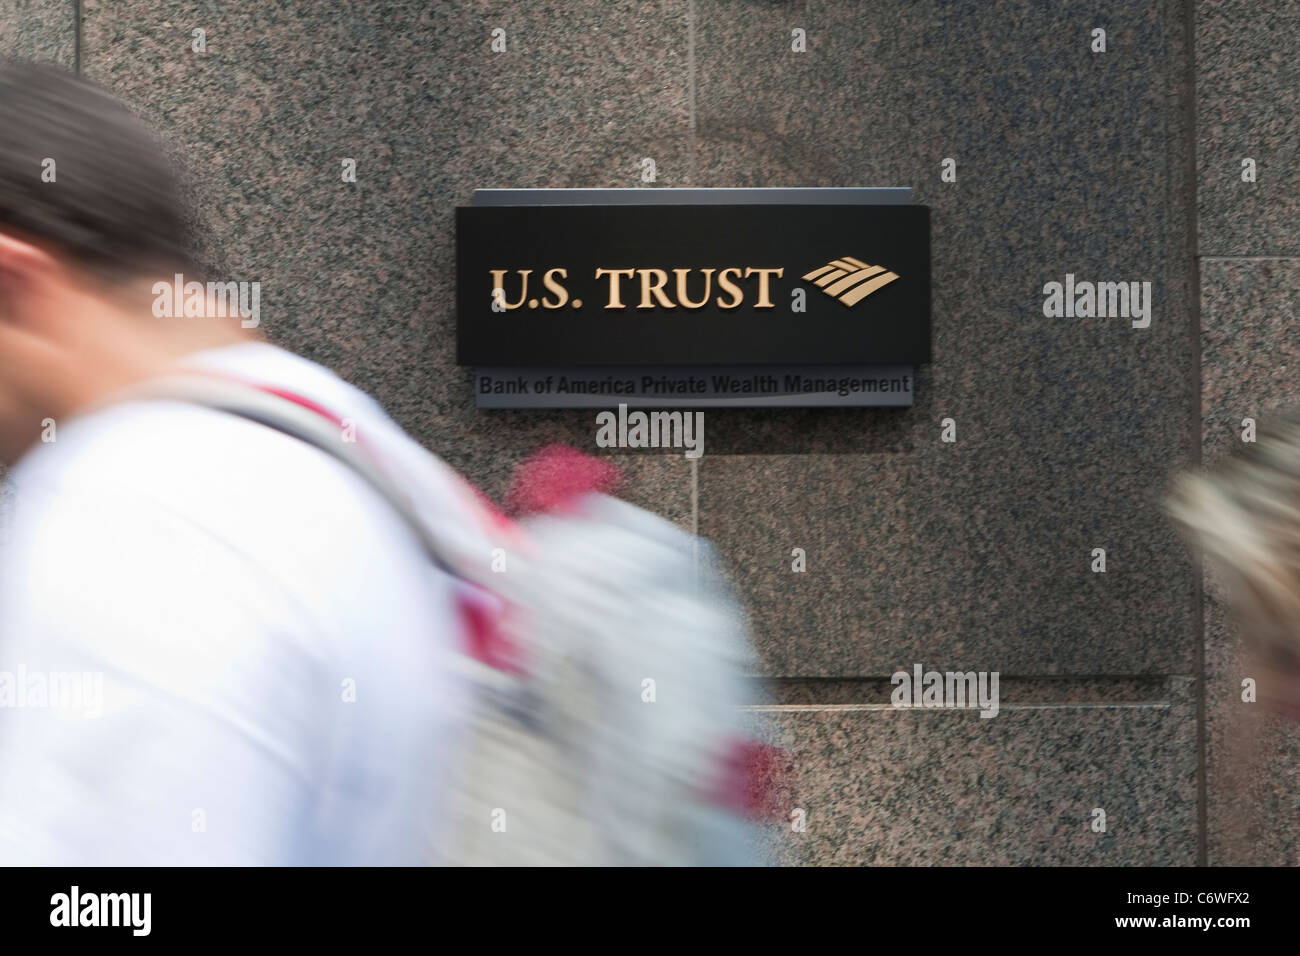 U.S. Trust Corporation office is pictured in the New York City borough of Manhattan, NY, Tuesday August 2, 2011. Stock Photo